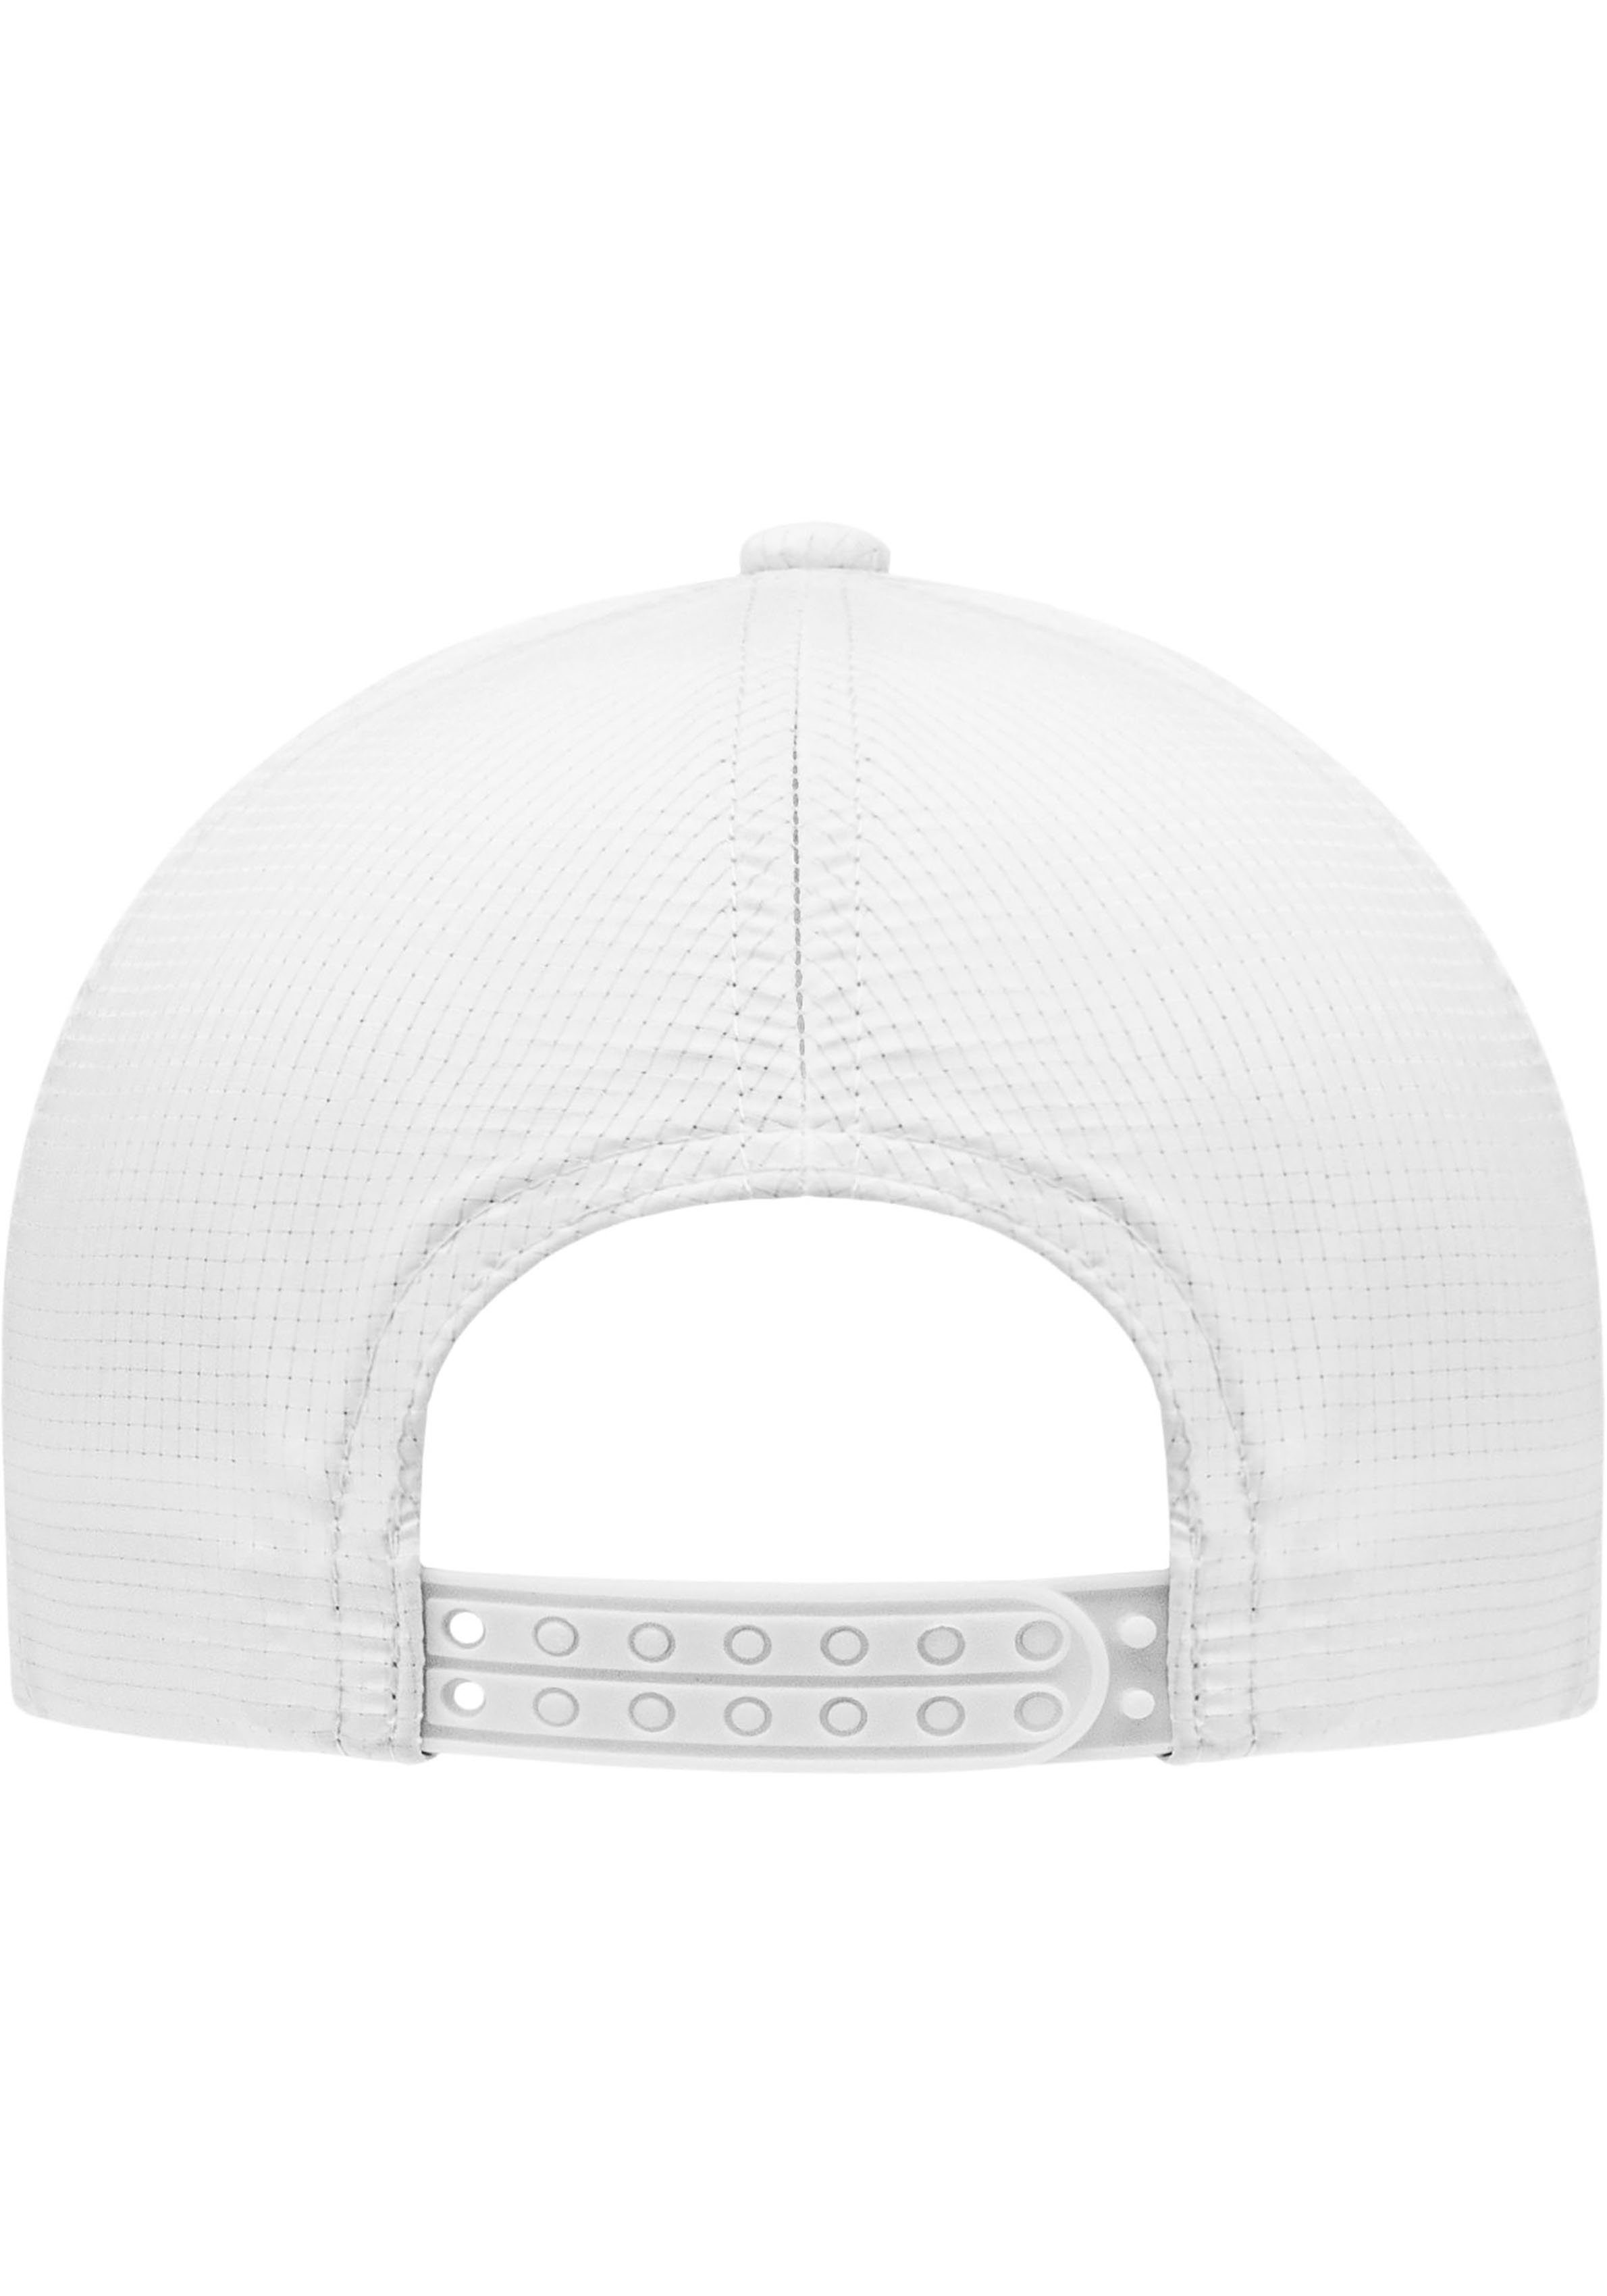 Hat Cap weiß Baseball Langley chillouts